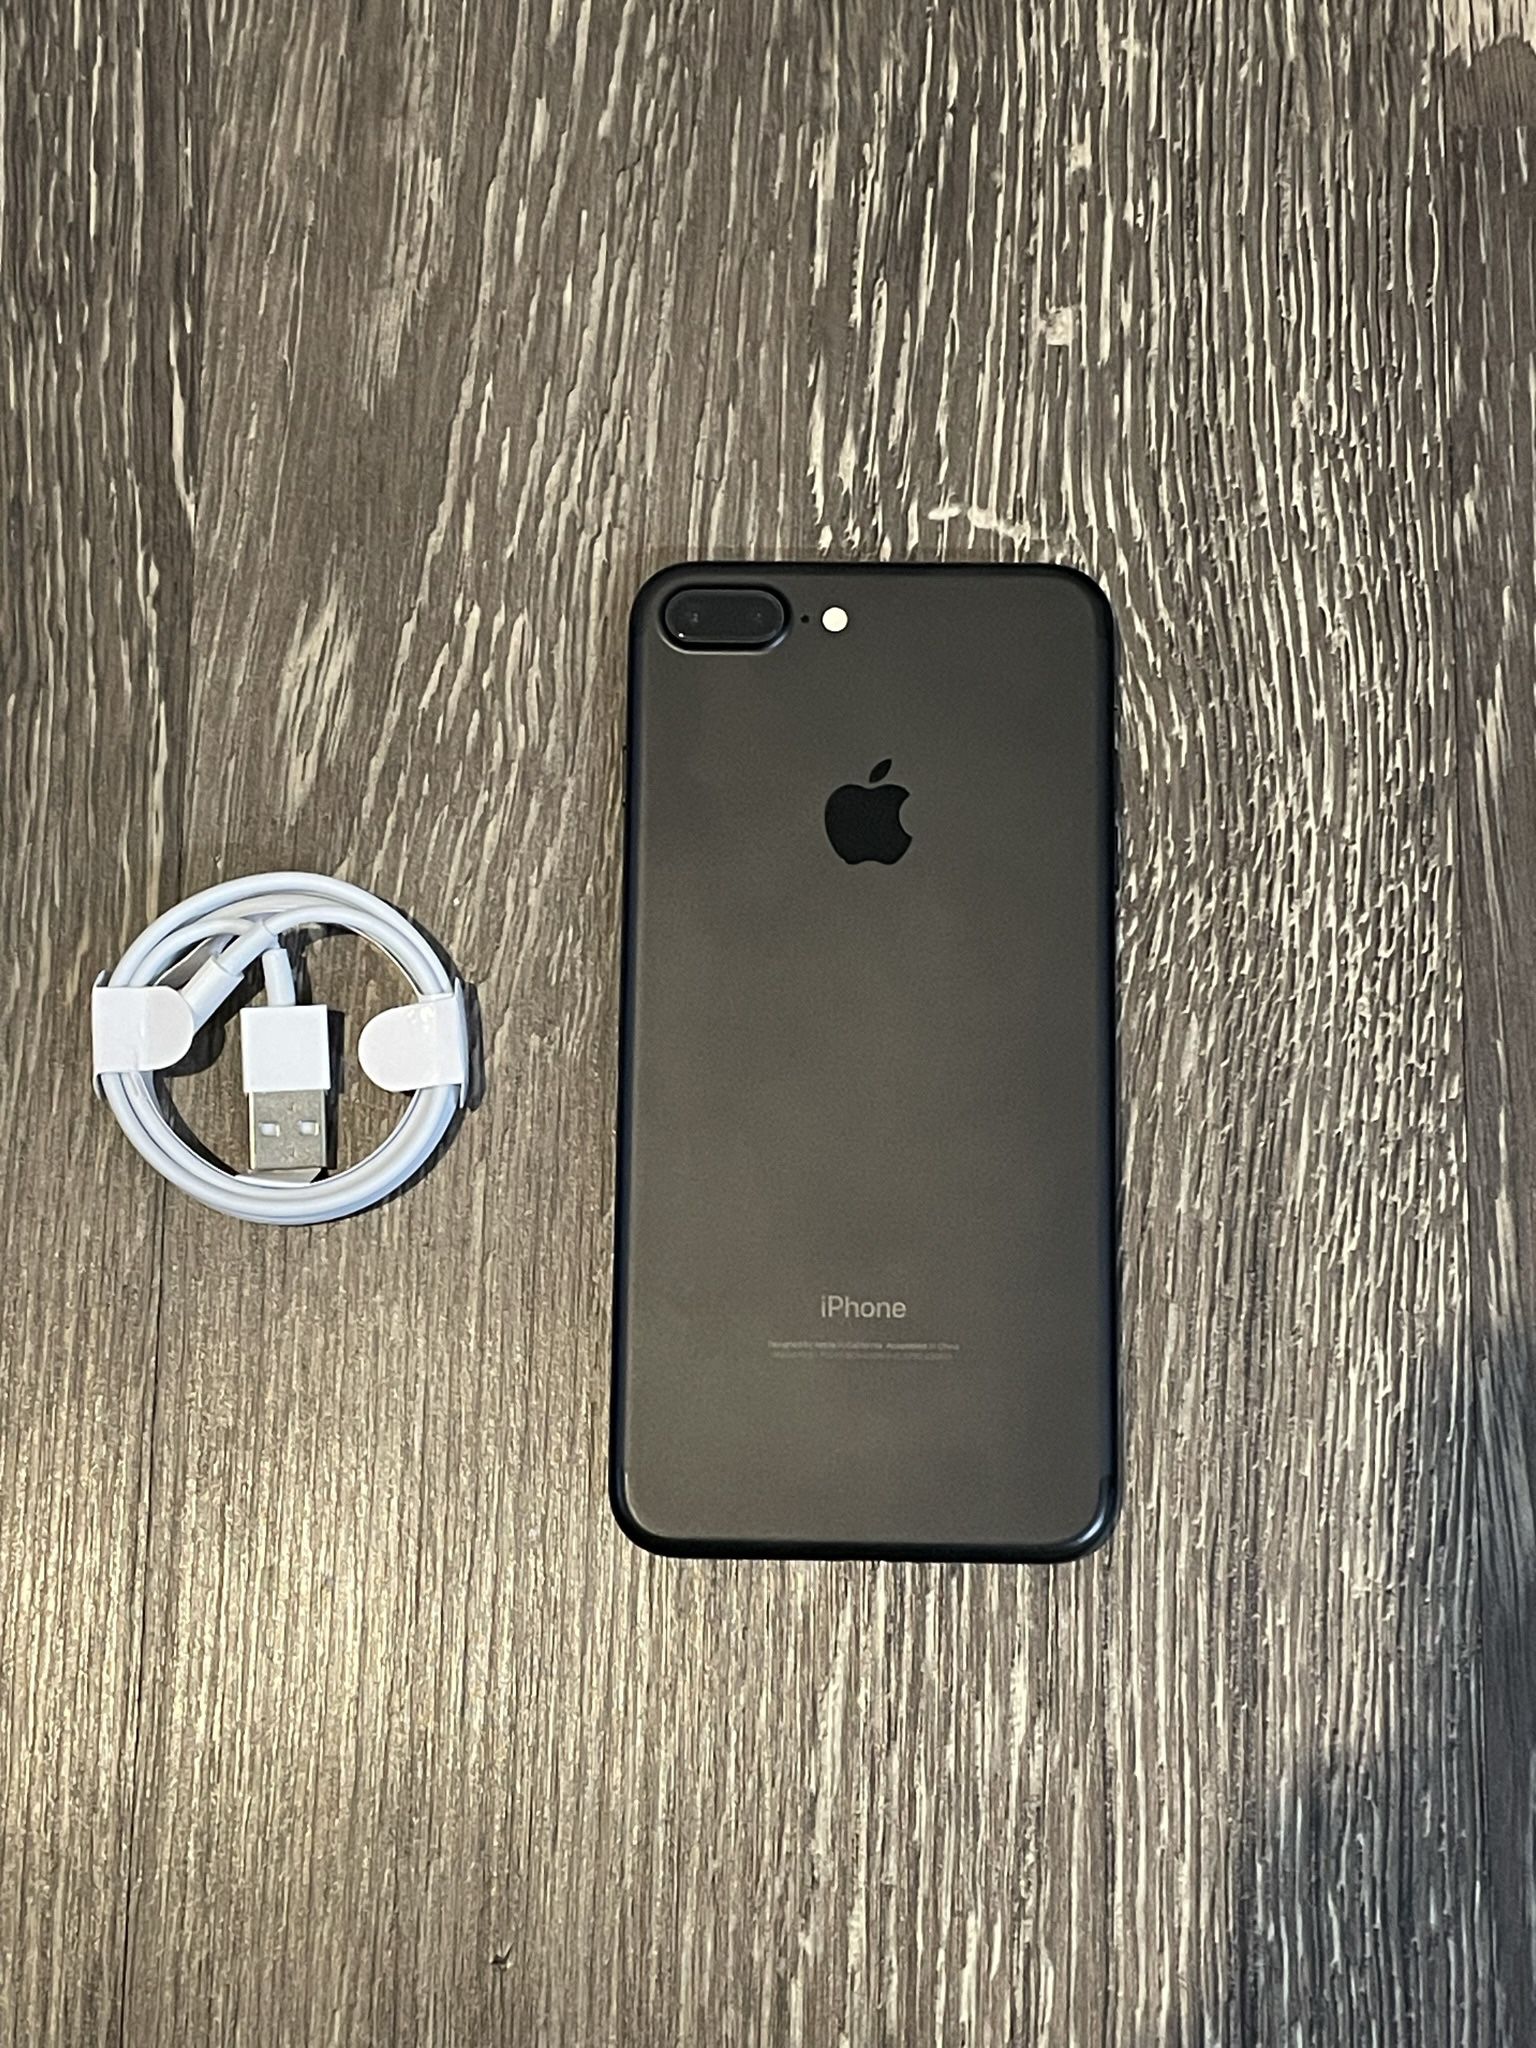 iPhone 7 Plus UNLOCKED FOR ANY CARRIER!